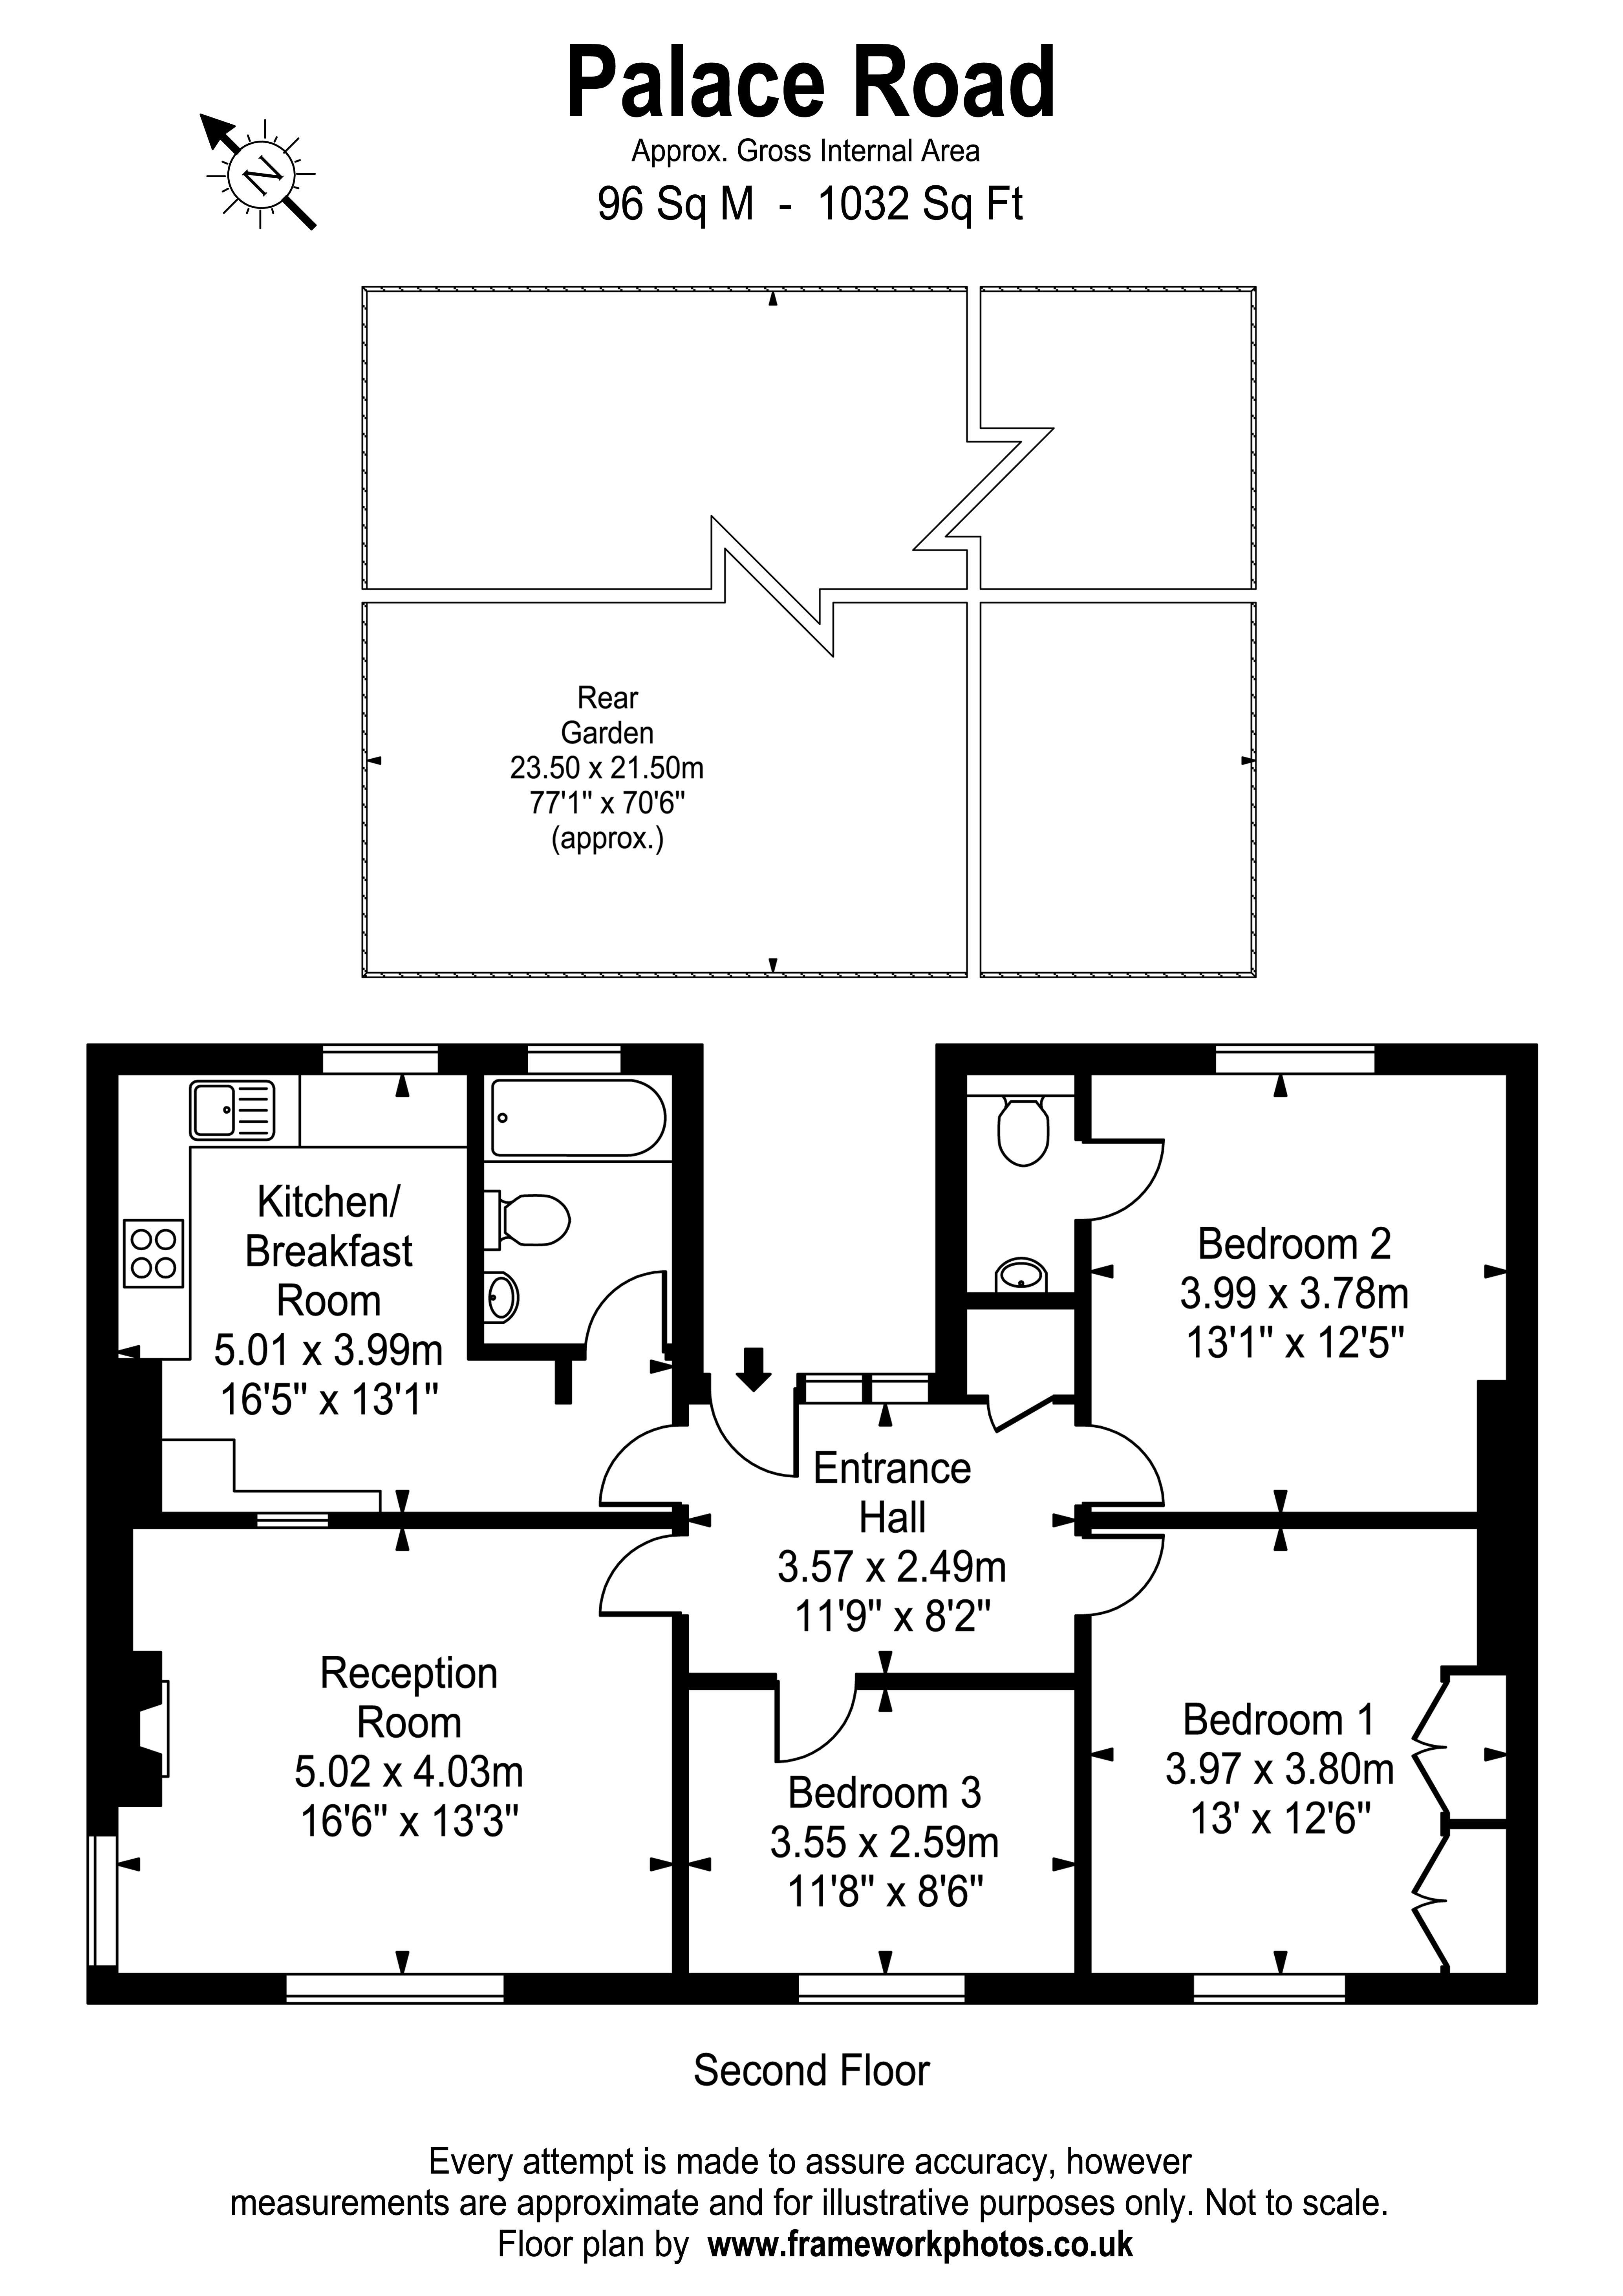 Floorplans For Palace Road, East Molesey